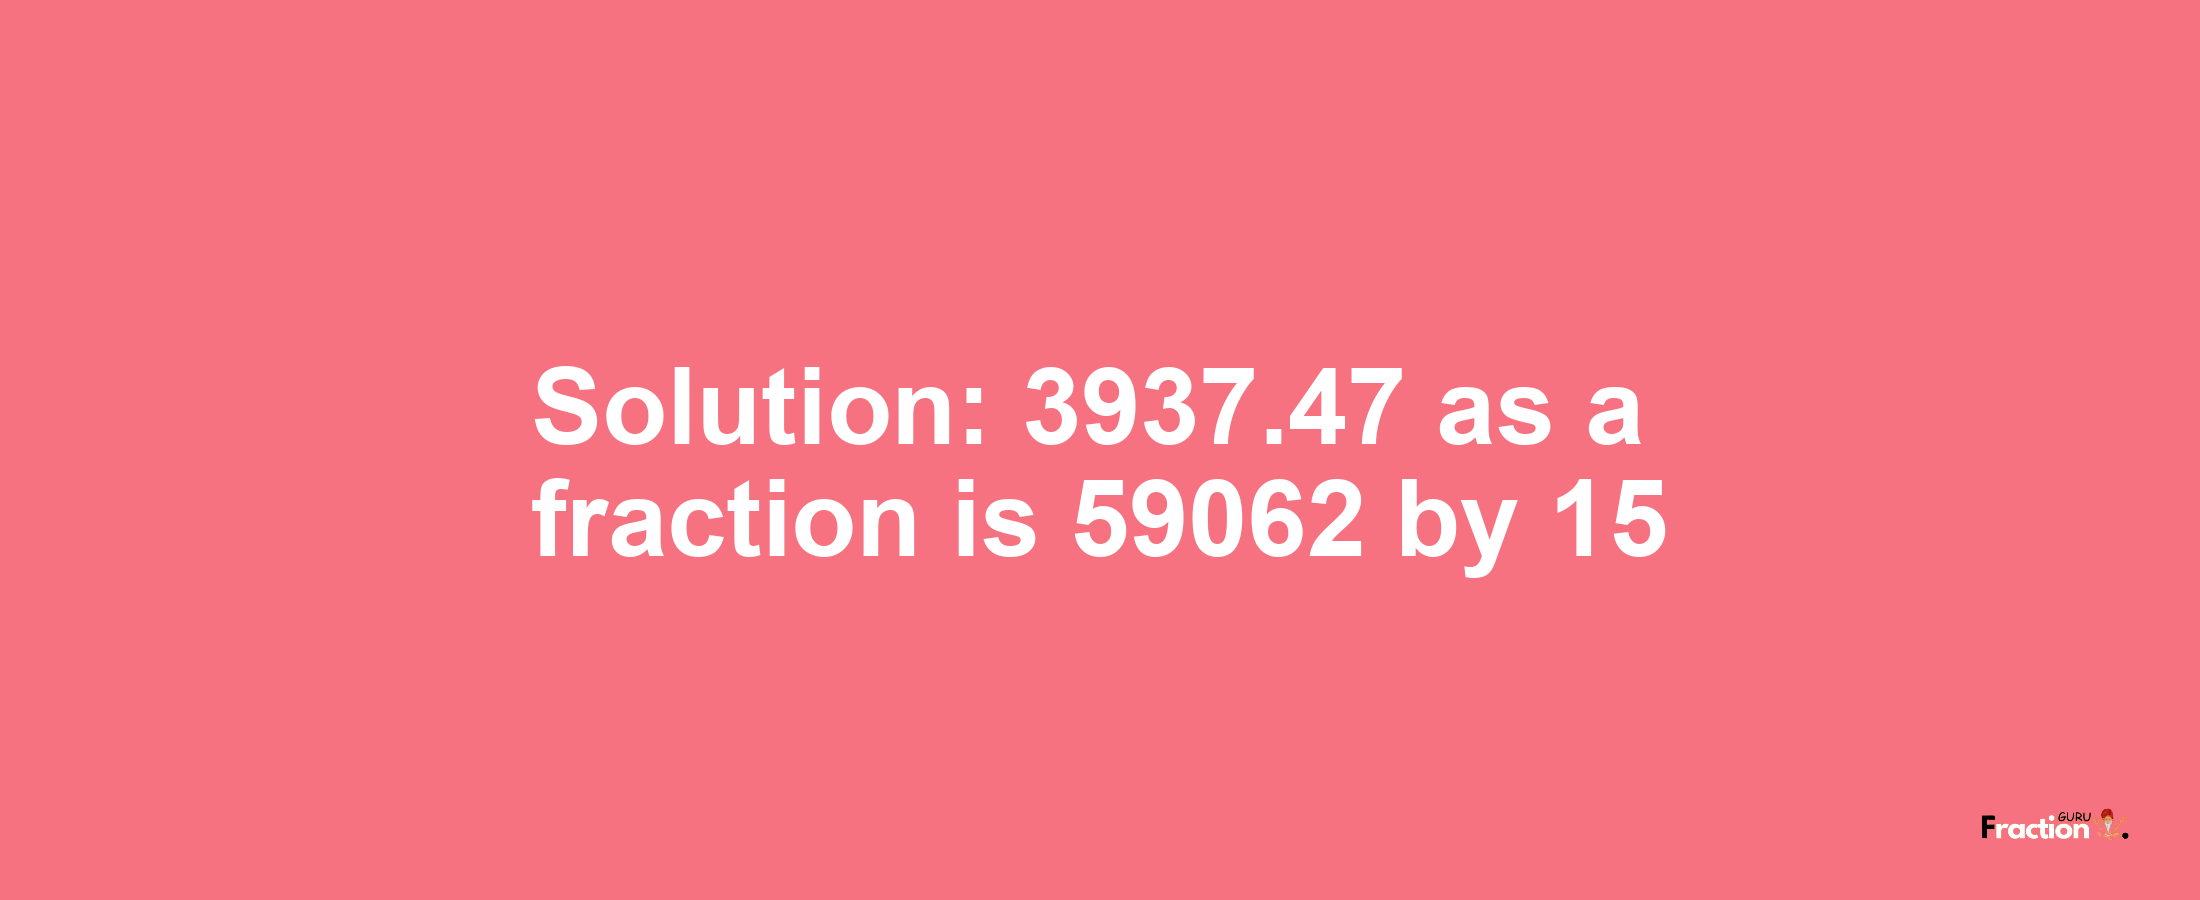 Solution:3937.47 as a fraction is 59062/15